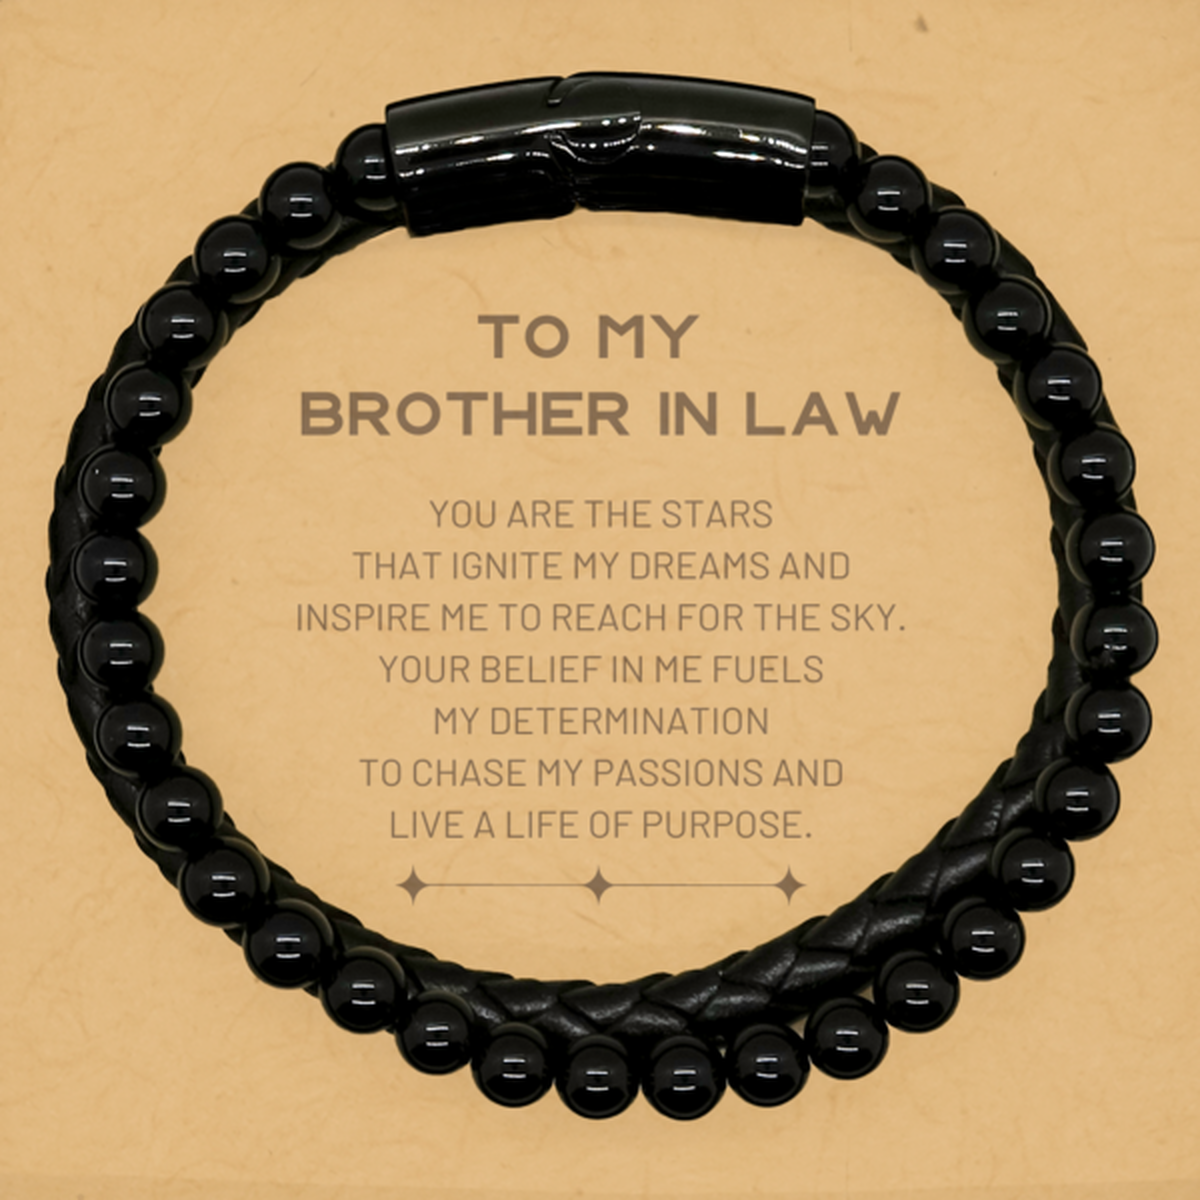 To My Brother In Law Stone Leather Bracelets, You are the stars that ignite my dreams and inspire me to reach for the sky, Birthday Unique Gifts For Brother In Law, Thank You Gifts For Brother In Law